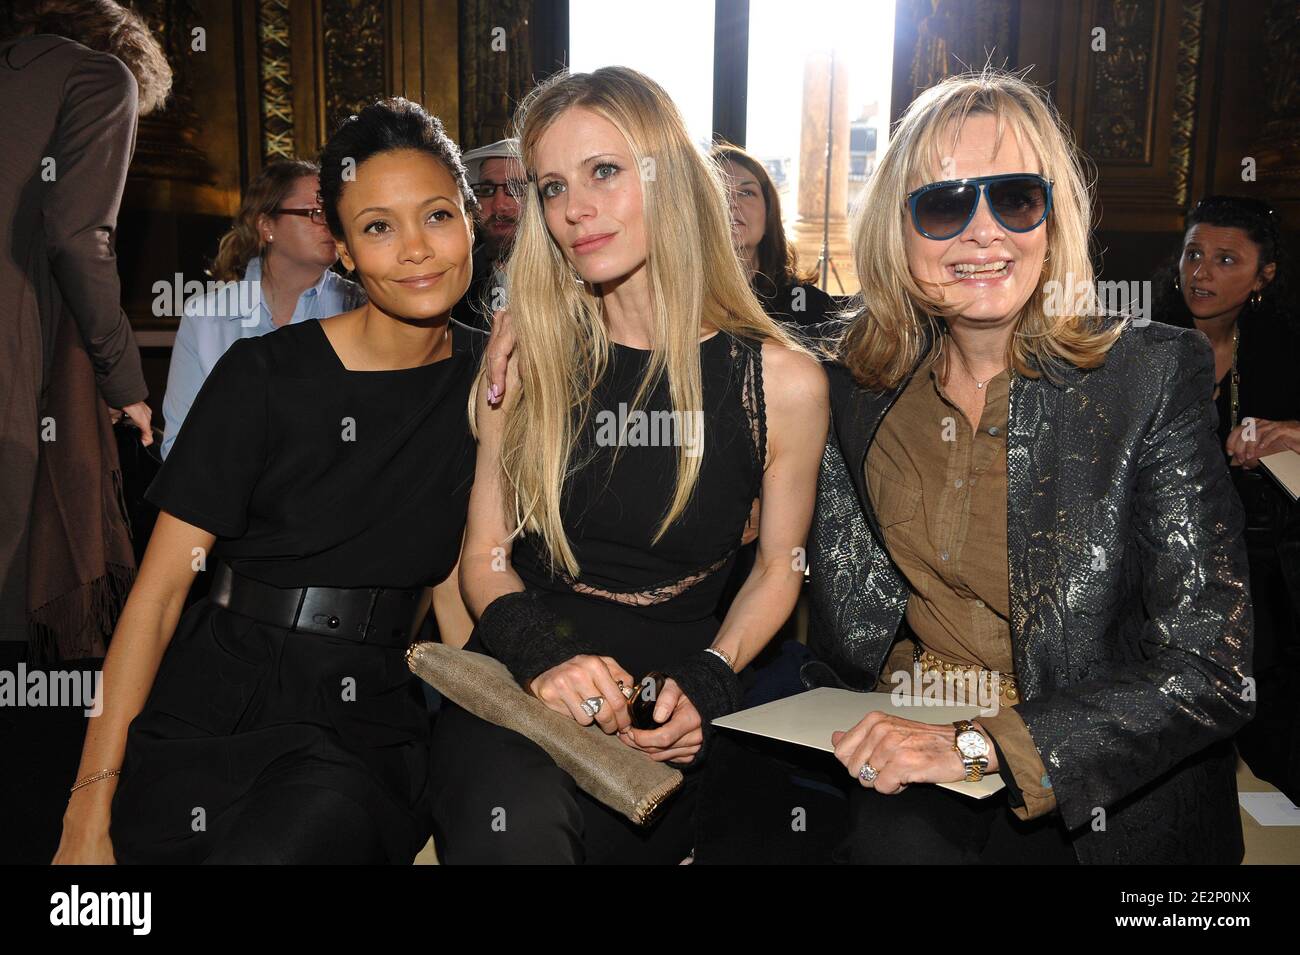 (L-R) Thandie Newton, Laura Bailey and Twiggy Lawson front row for the Stella McCartney Fall-Winter 2010/2011 ready-to-wear collection show held at the Opera Garnier in Paris, France on March 8, 2010. Photo by Thierry Orban/ABACAPRESS.COM Stock Photo